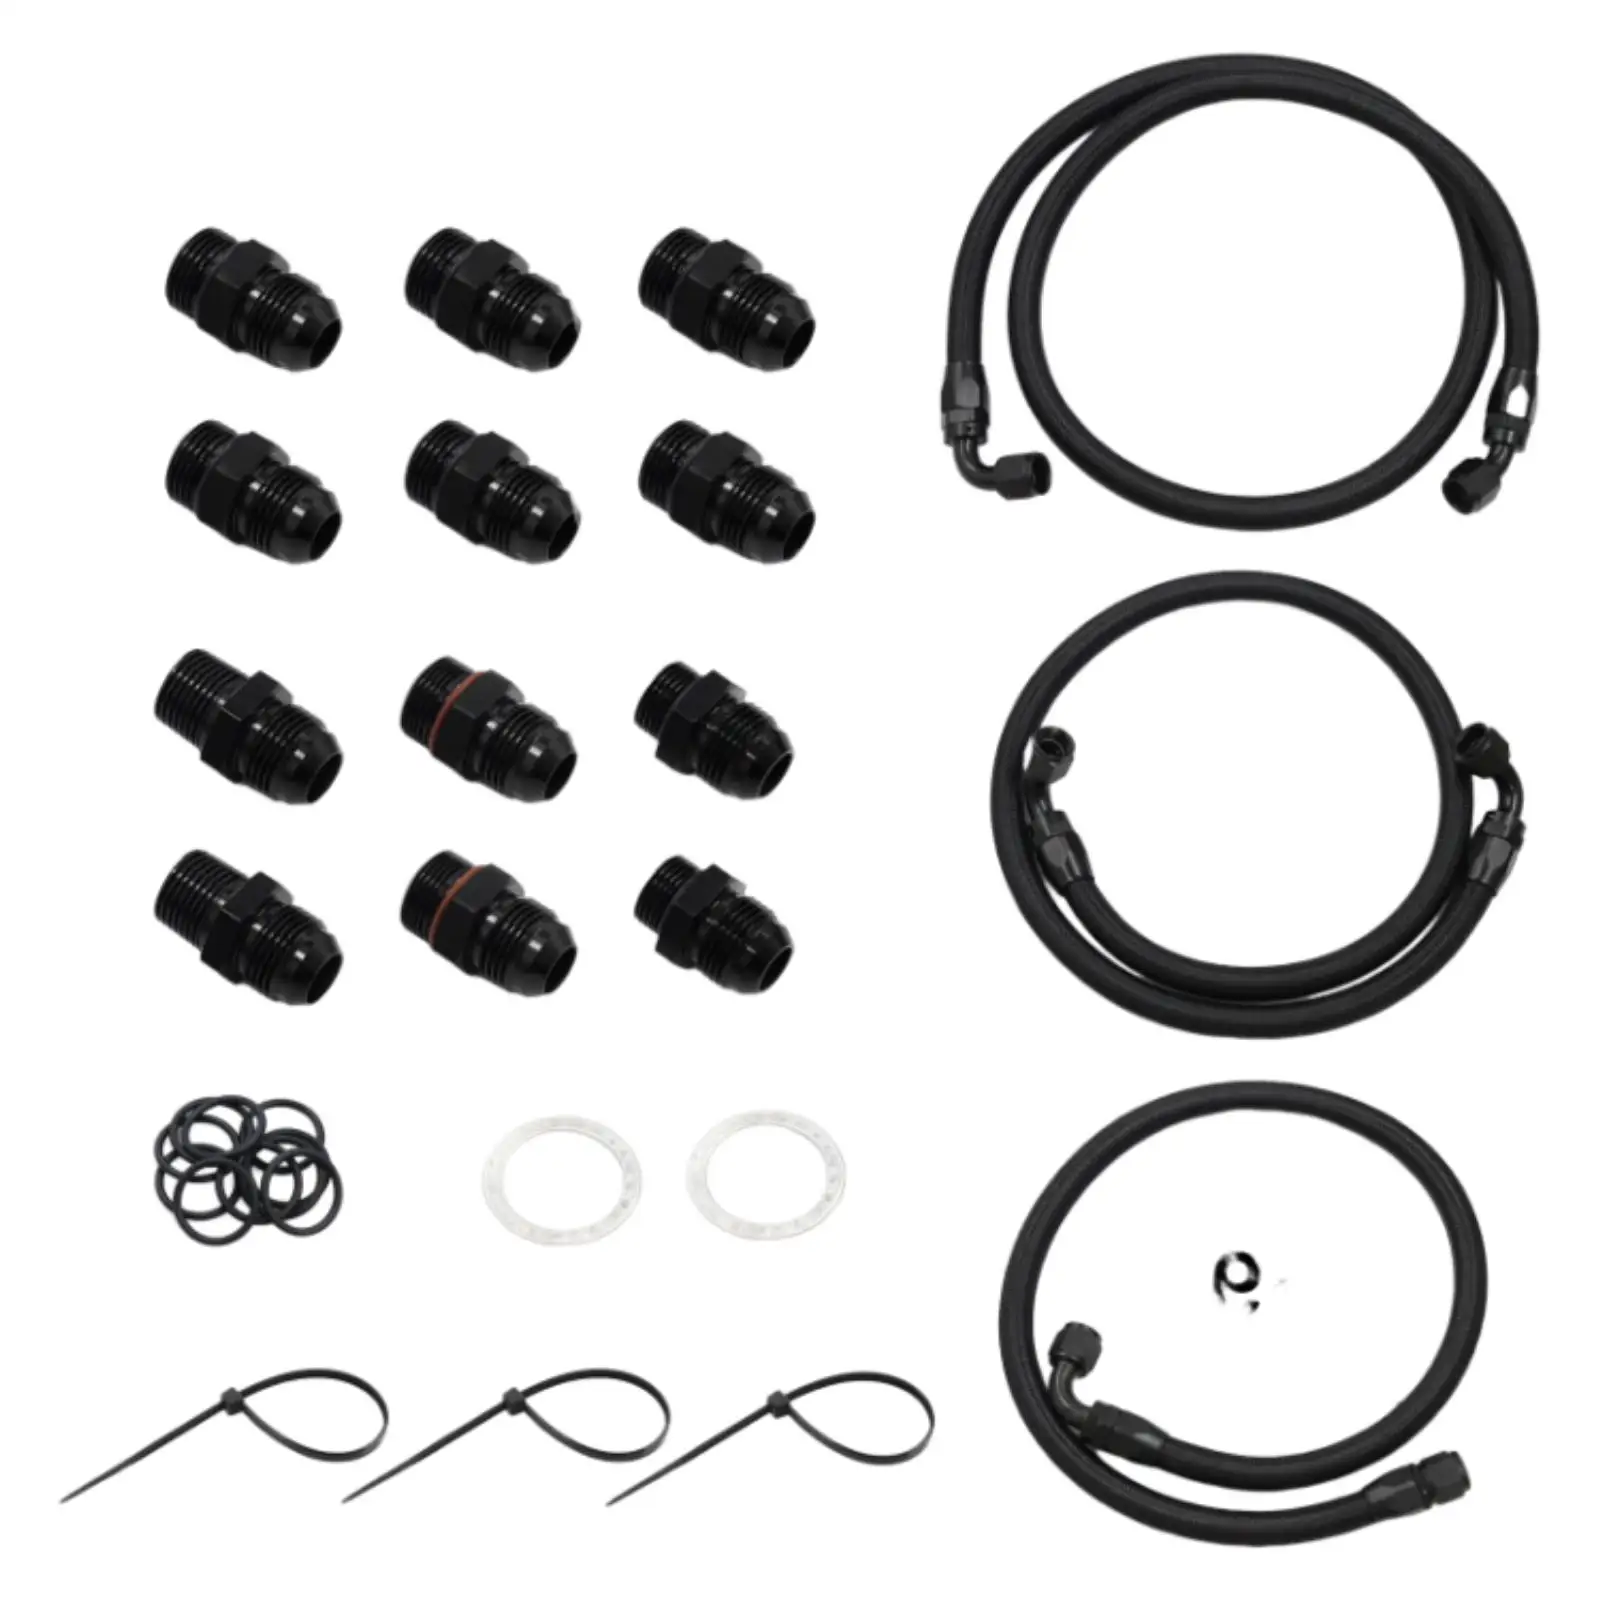 Transmission Cooler Lines Kit Easy to Install Heavy Duty Professional Replaces for GM 6.6 lb7 Lly Duramax 2001 to 2005